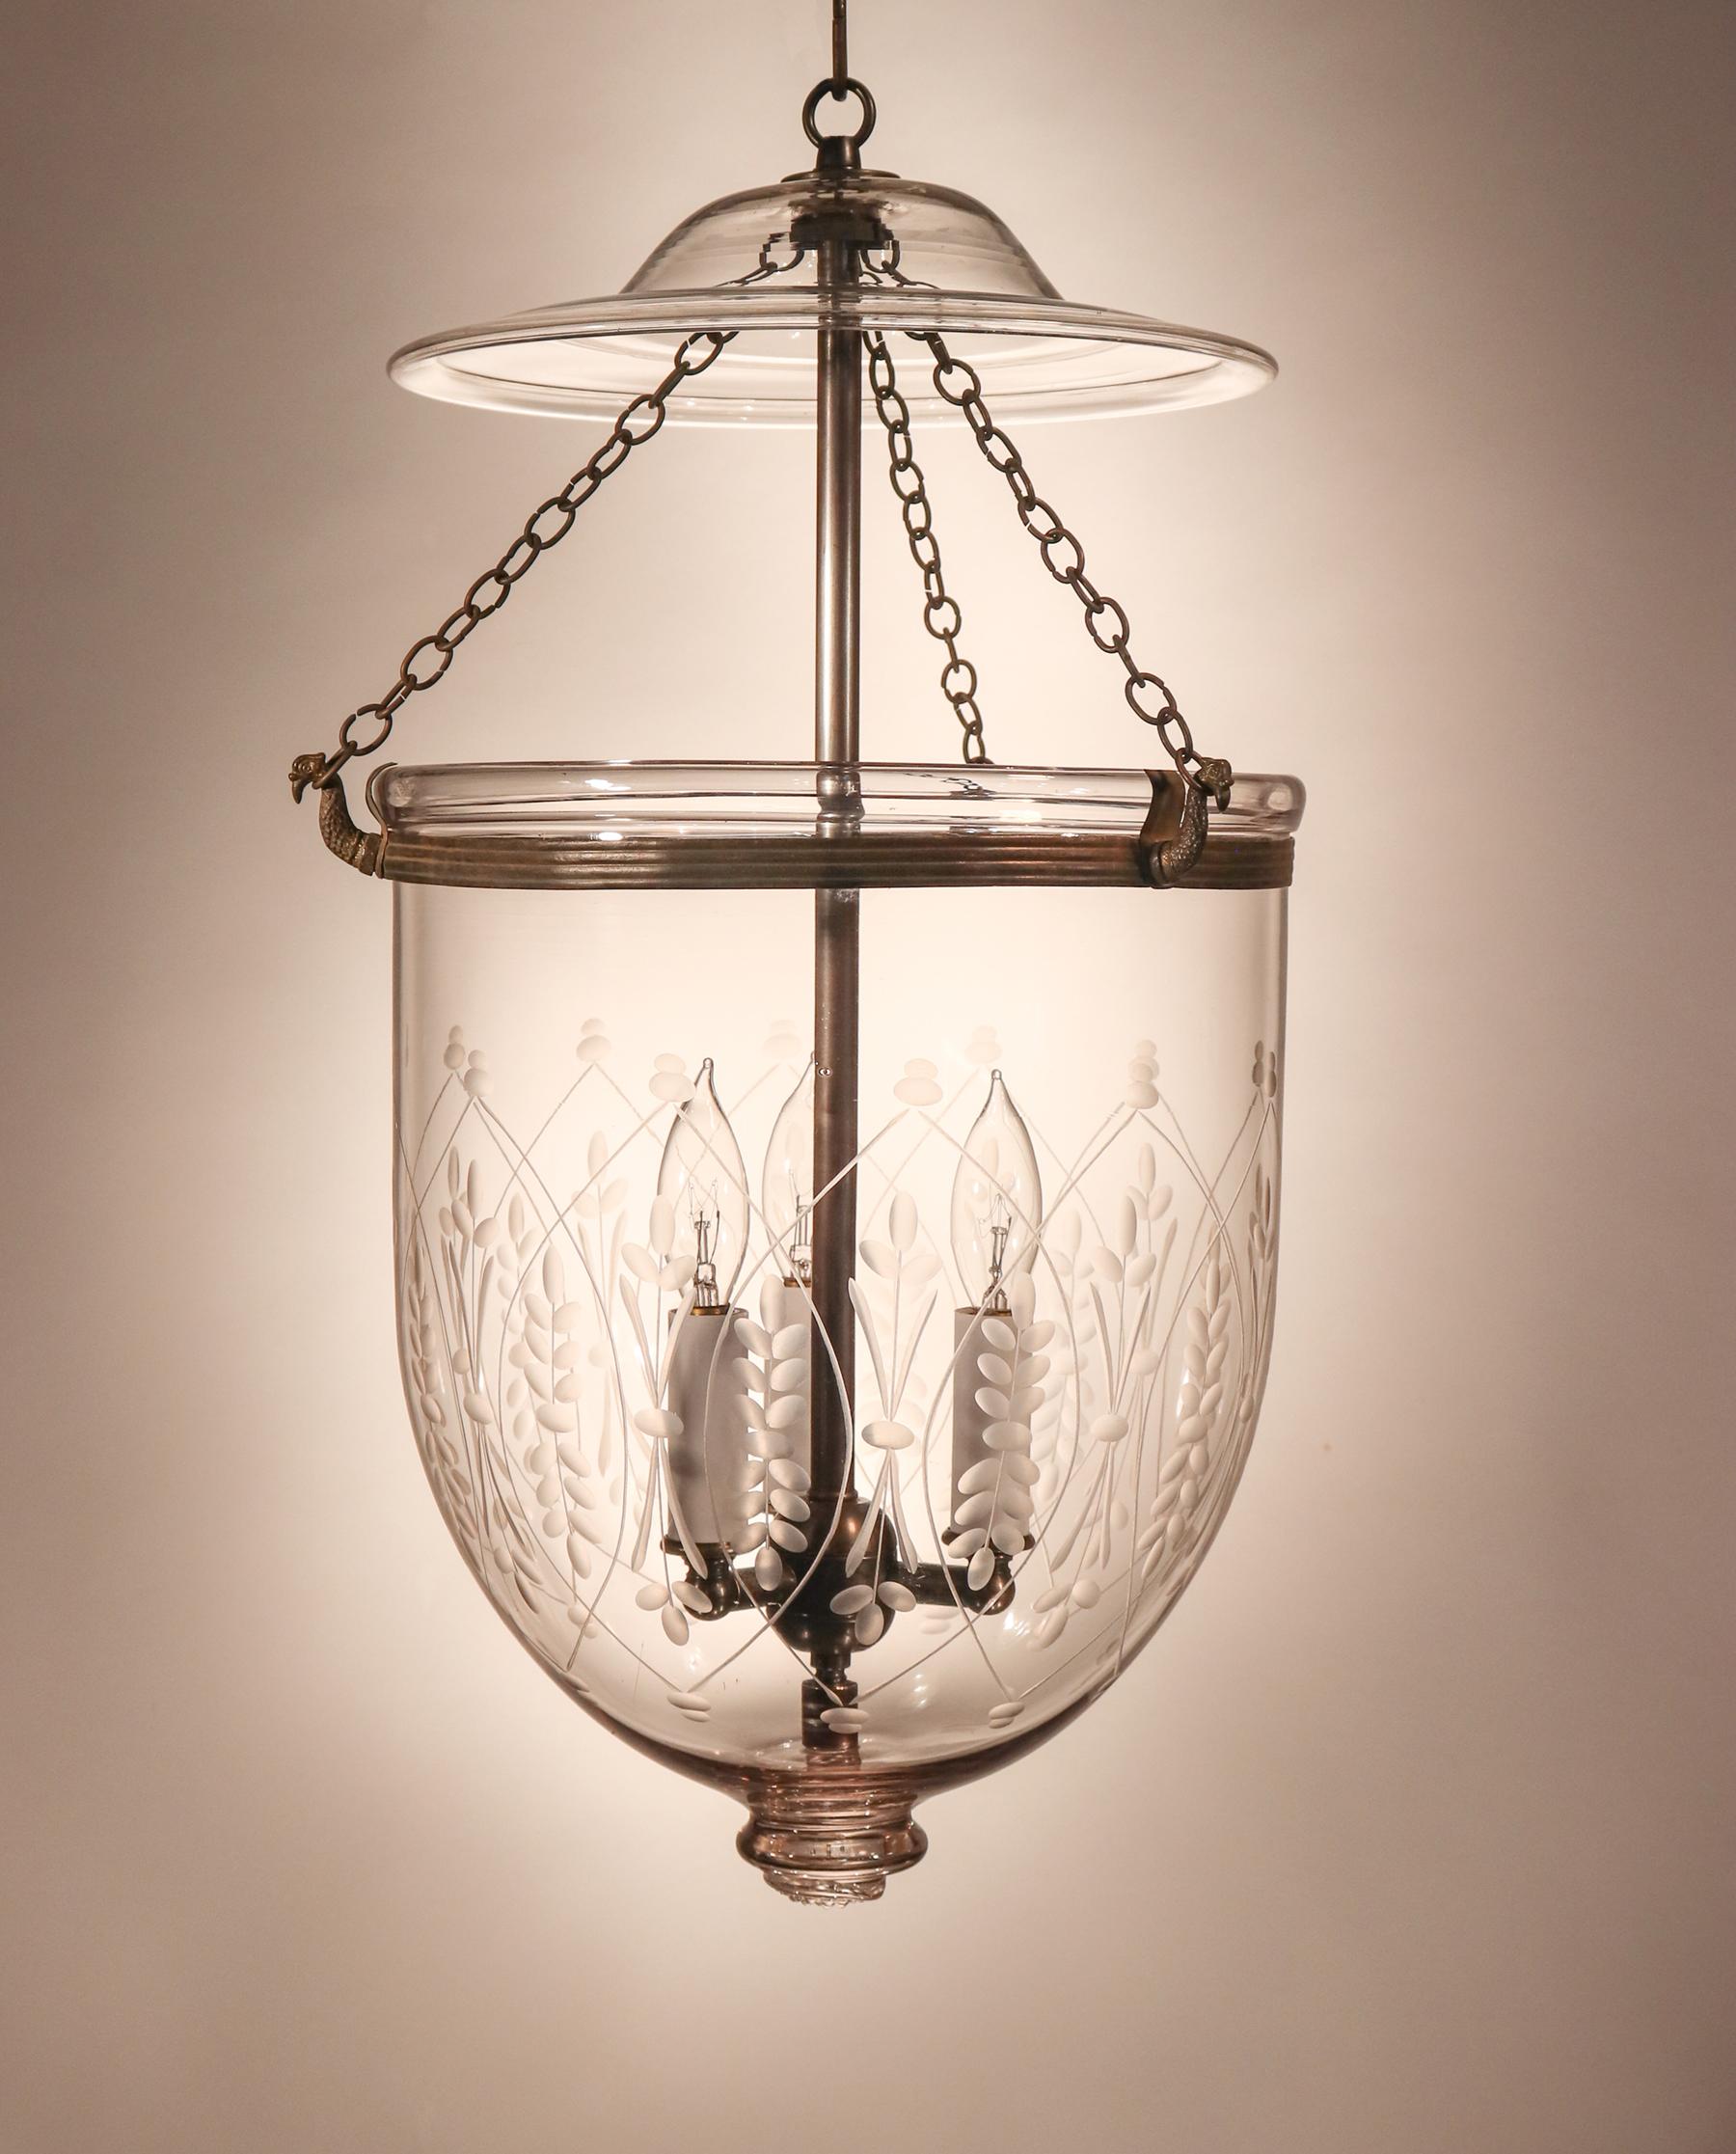 An antique English bell jar lantern, circa 1880, with full form that is complemented by an etched wheat design. This hand blown glass pendant features its original, rolled brass band and smoke bell. Originally for a candle or floating wick, the